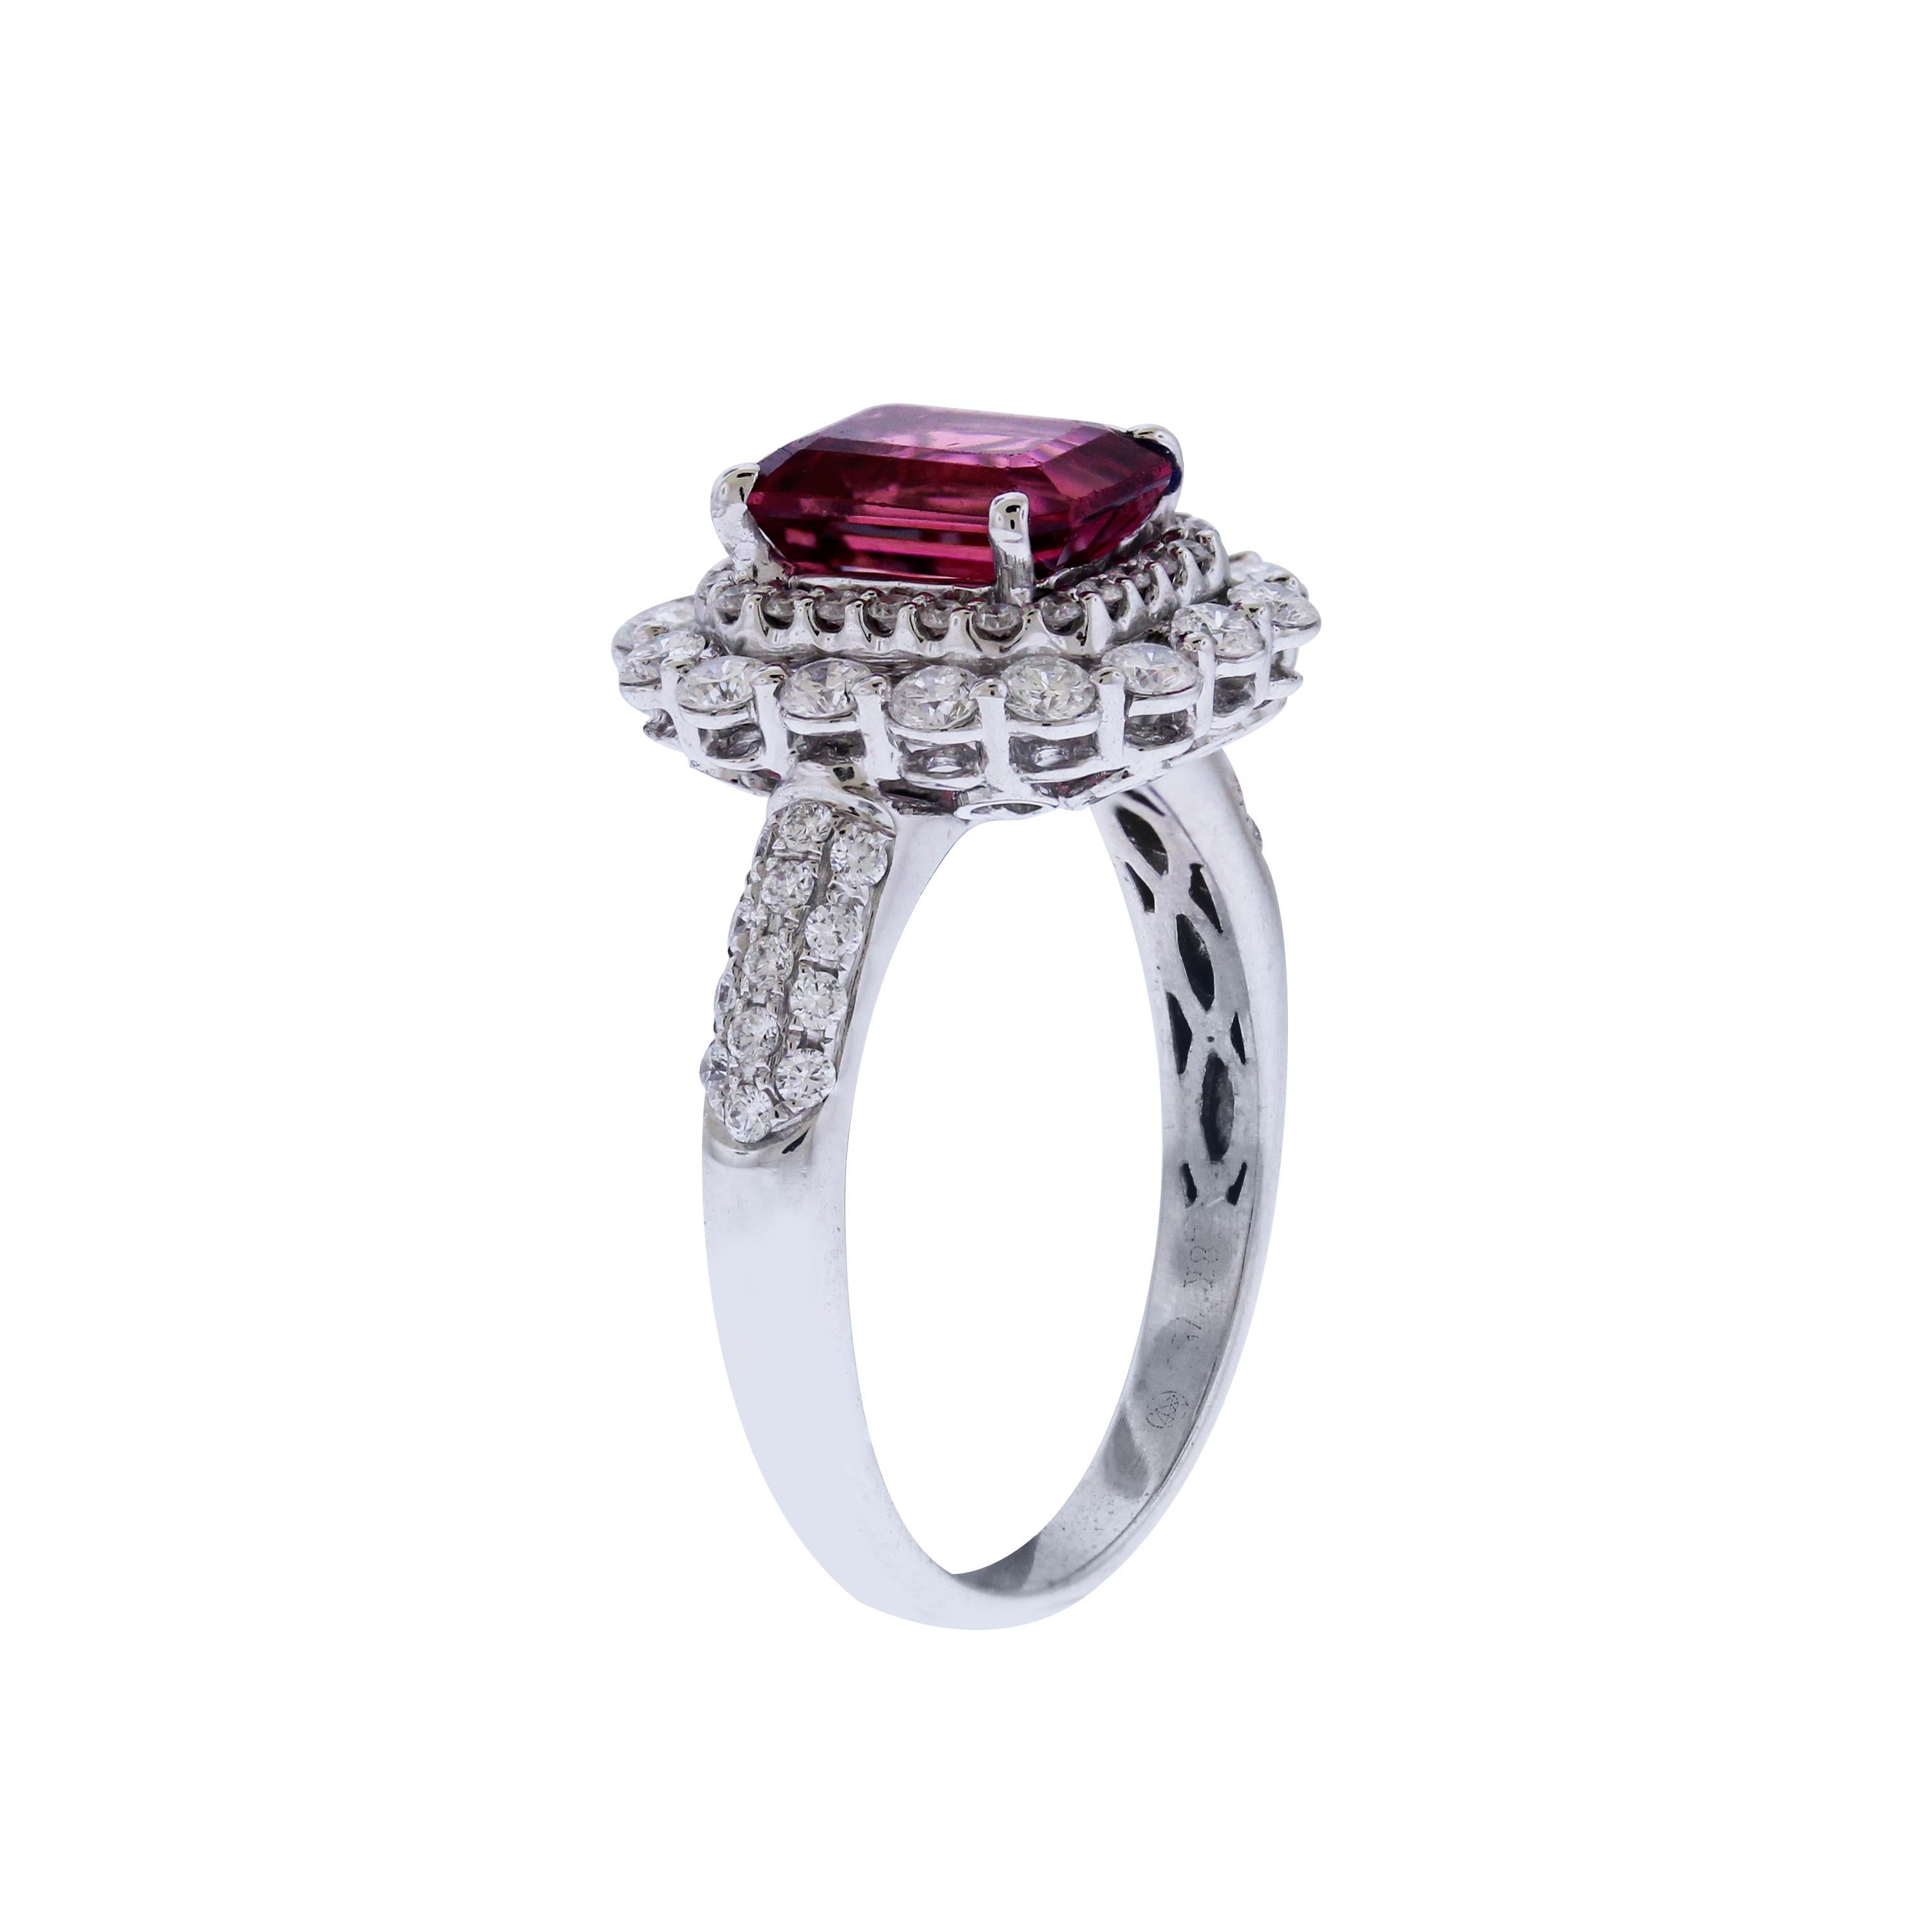 18K White Gold and Diamond Cocktail Ring with Red Tourmaline center

Tournaline is apprx. 3 carats, 8mm x 6mm dimmensions

0.75 carat diamonds are set on the band and surrounding the Tourmaline

Ring face is 0.55 inch by 0.5 inch. 3mm band